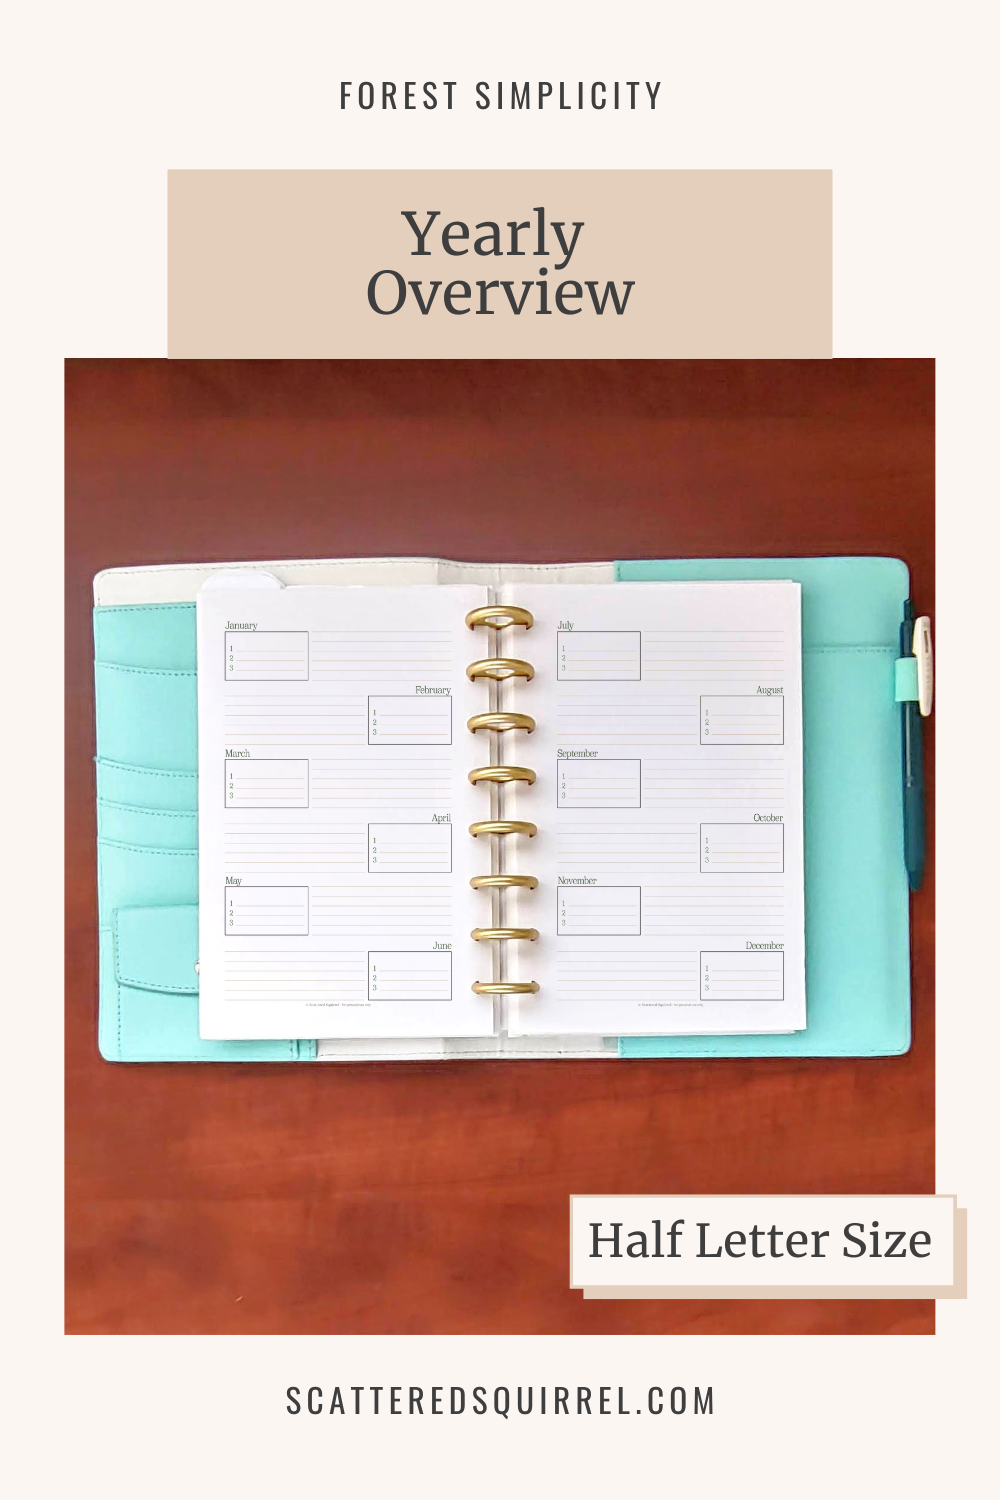 Image says "Forest Simplicity - Yearly Overview" at the top. Underneath is a picture of a white and teal leather planner lying open on a wooden desk. The pages are each divided into six sections, each one labeled with a month to allow for planning or notes for the whole year. This image links to the Half Letter Size Yearly Overview PDF that can be downloaded.